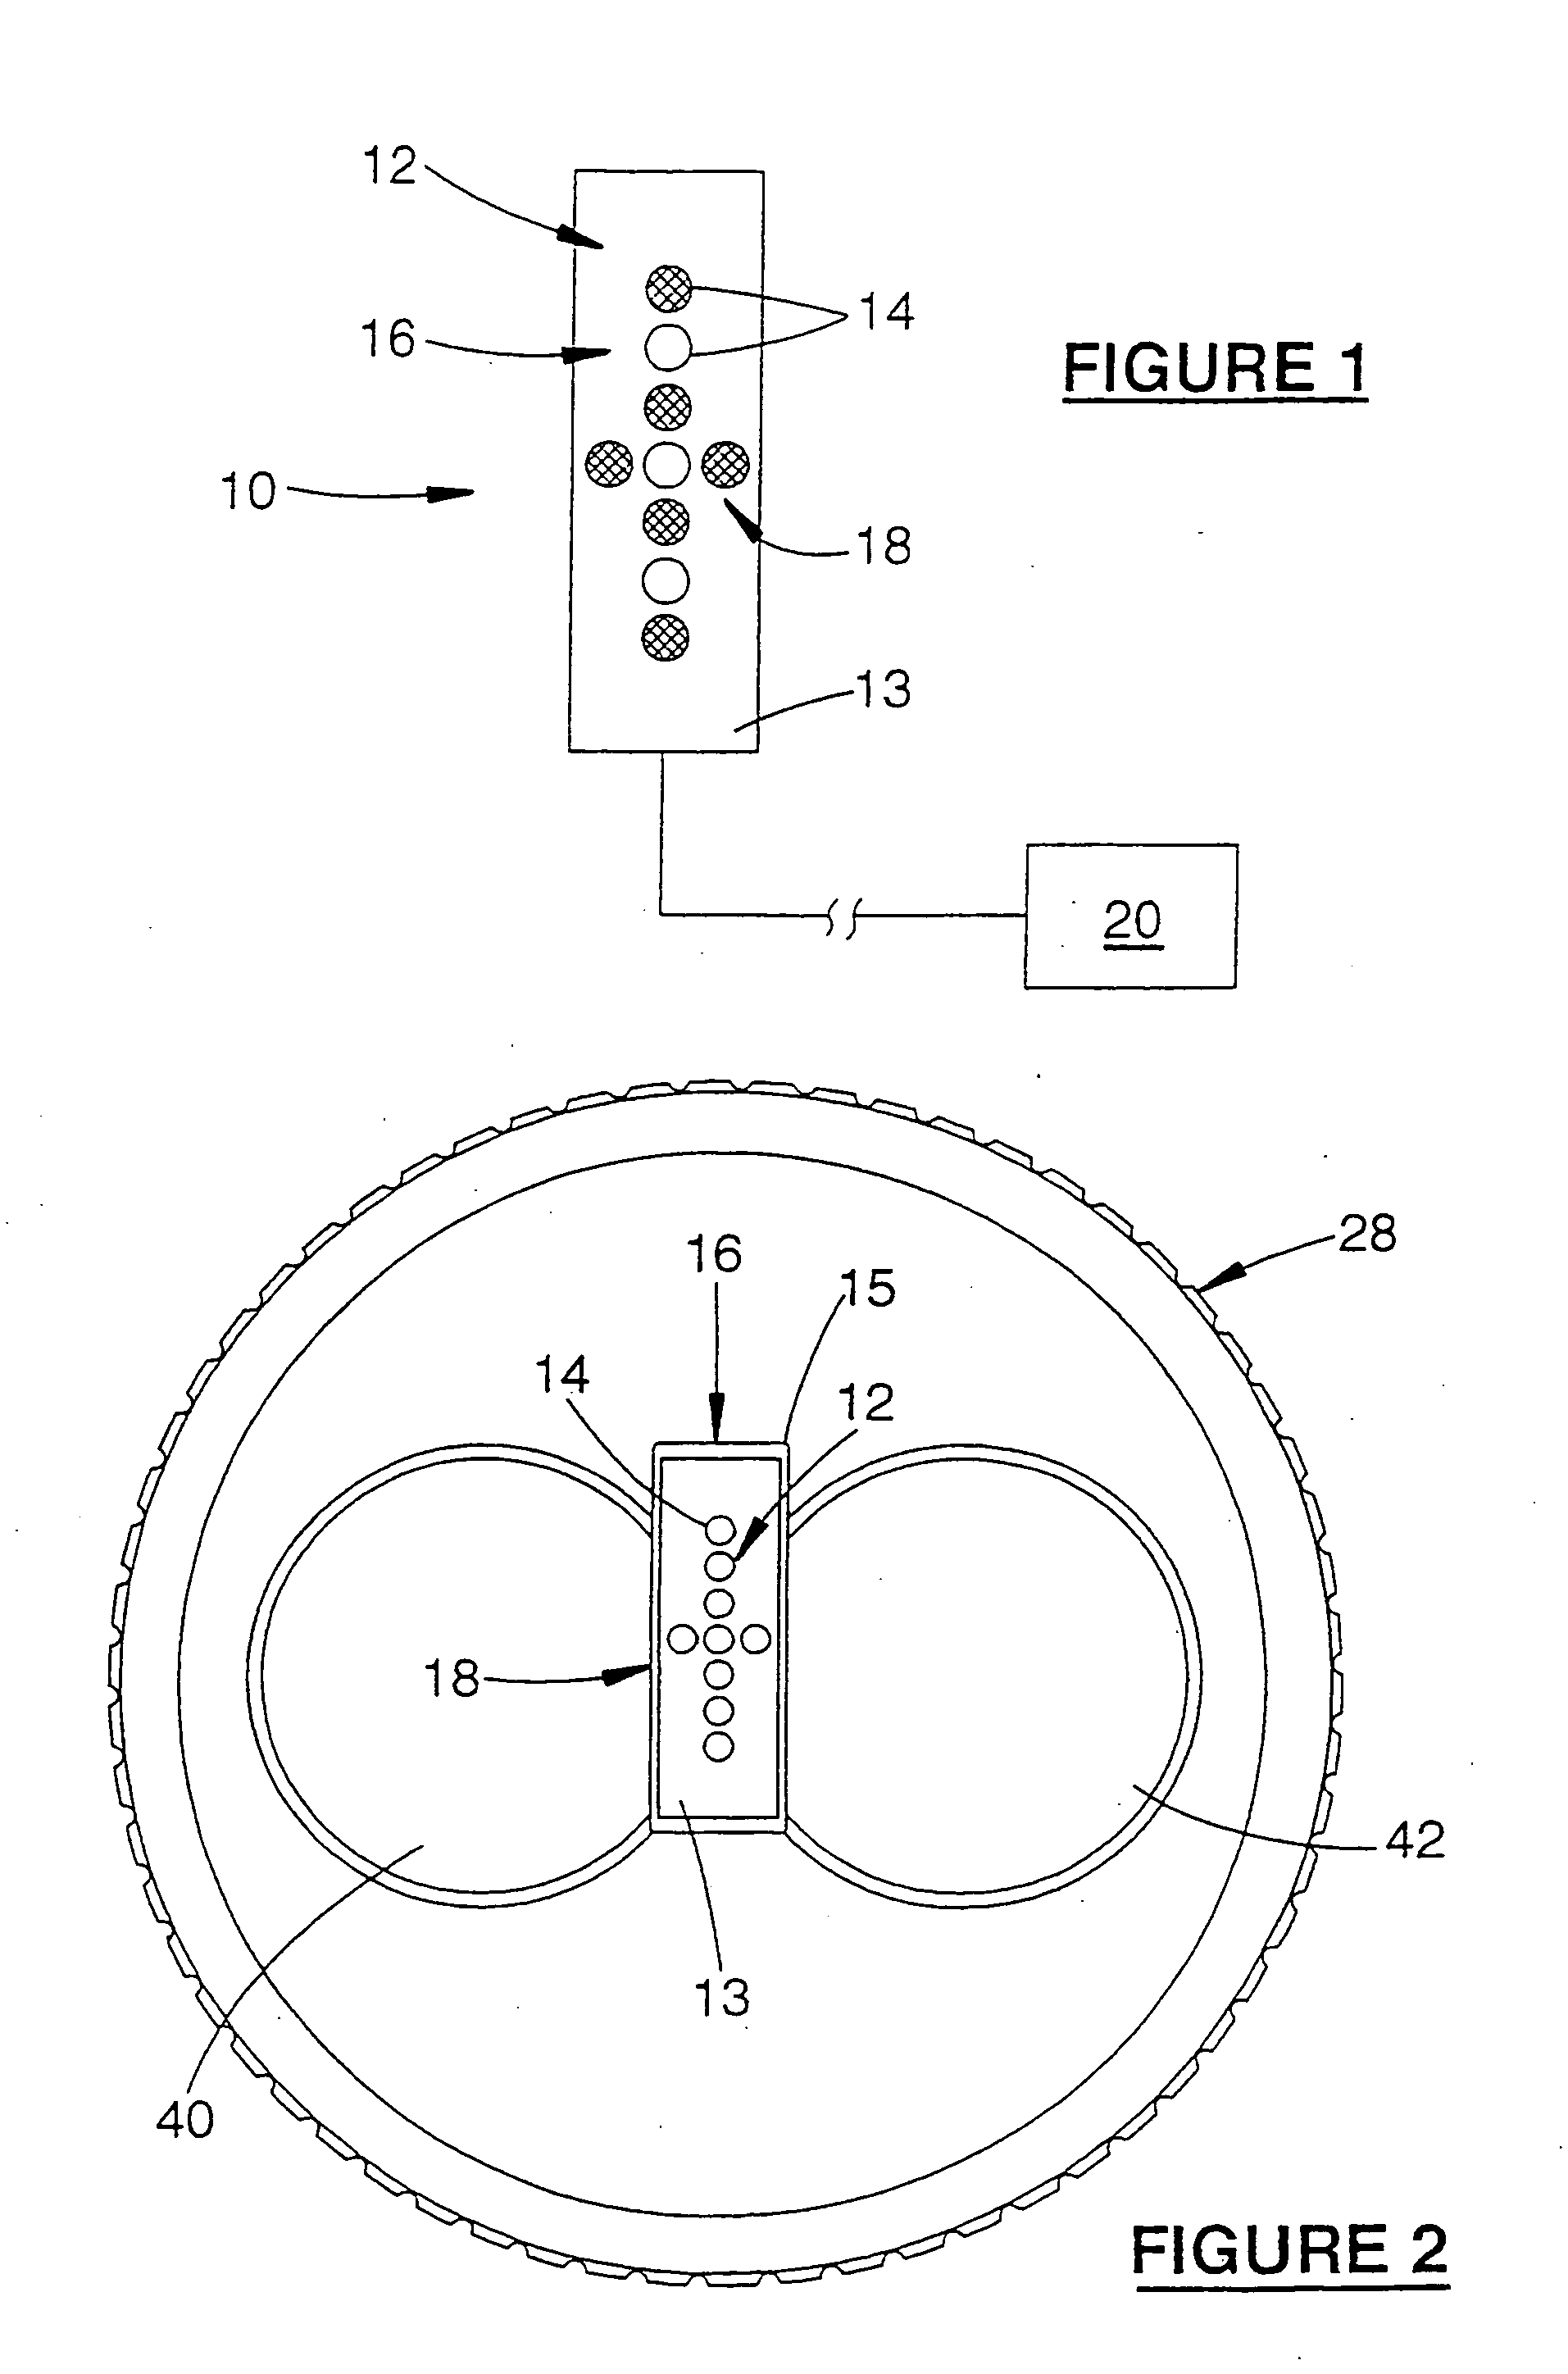 Surgical visual feedback and eye fixation method and apparatus